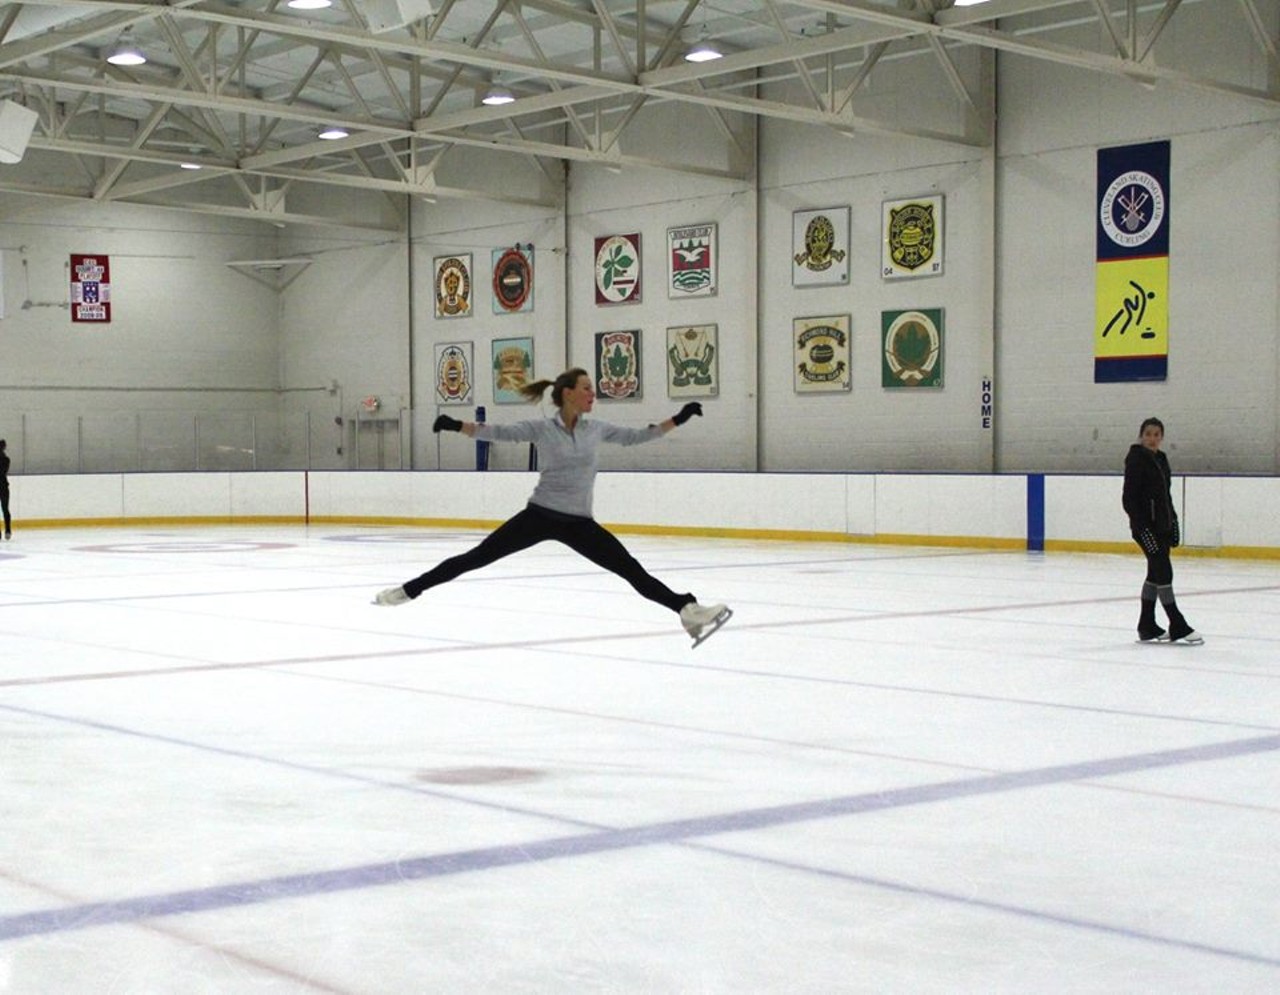  Cleveland Skating Club
2500 Kemper Rd., Shaker Heights, 216-791-2800 
Price: As this is a private athletic club, contact info@clevelandskatingclub.org for membership and rink hour information.
Photo courtesy Cleveland Skating Club